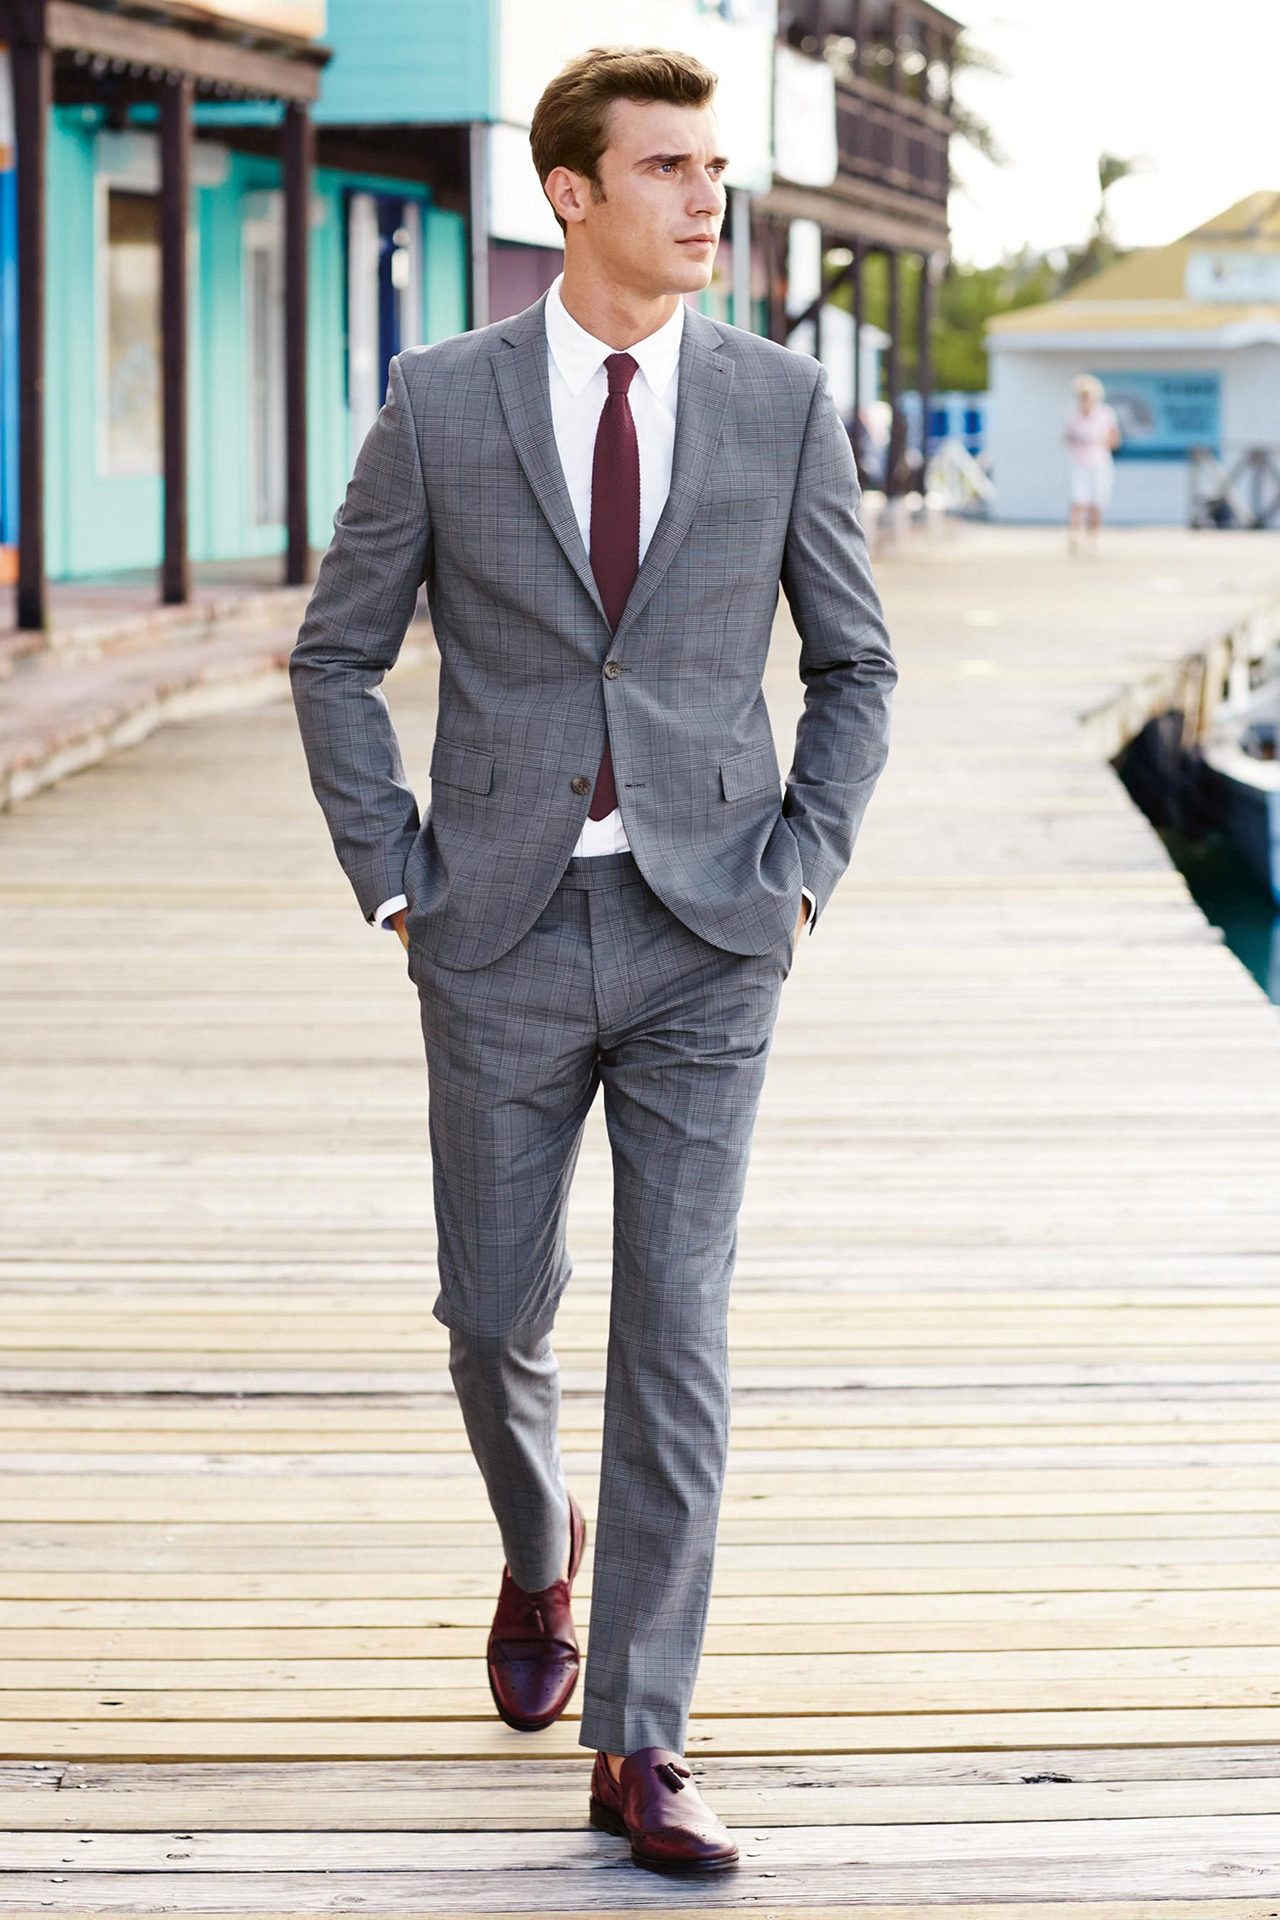 Burgundy loafers with a light grey suit and white shirt